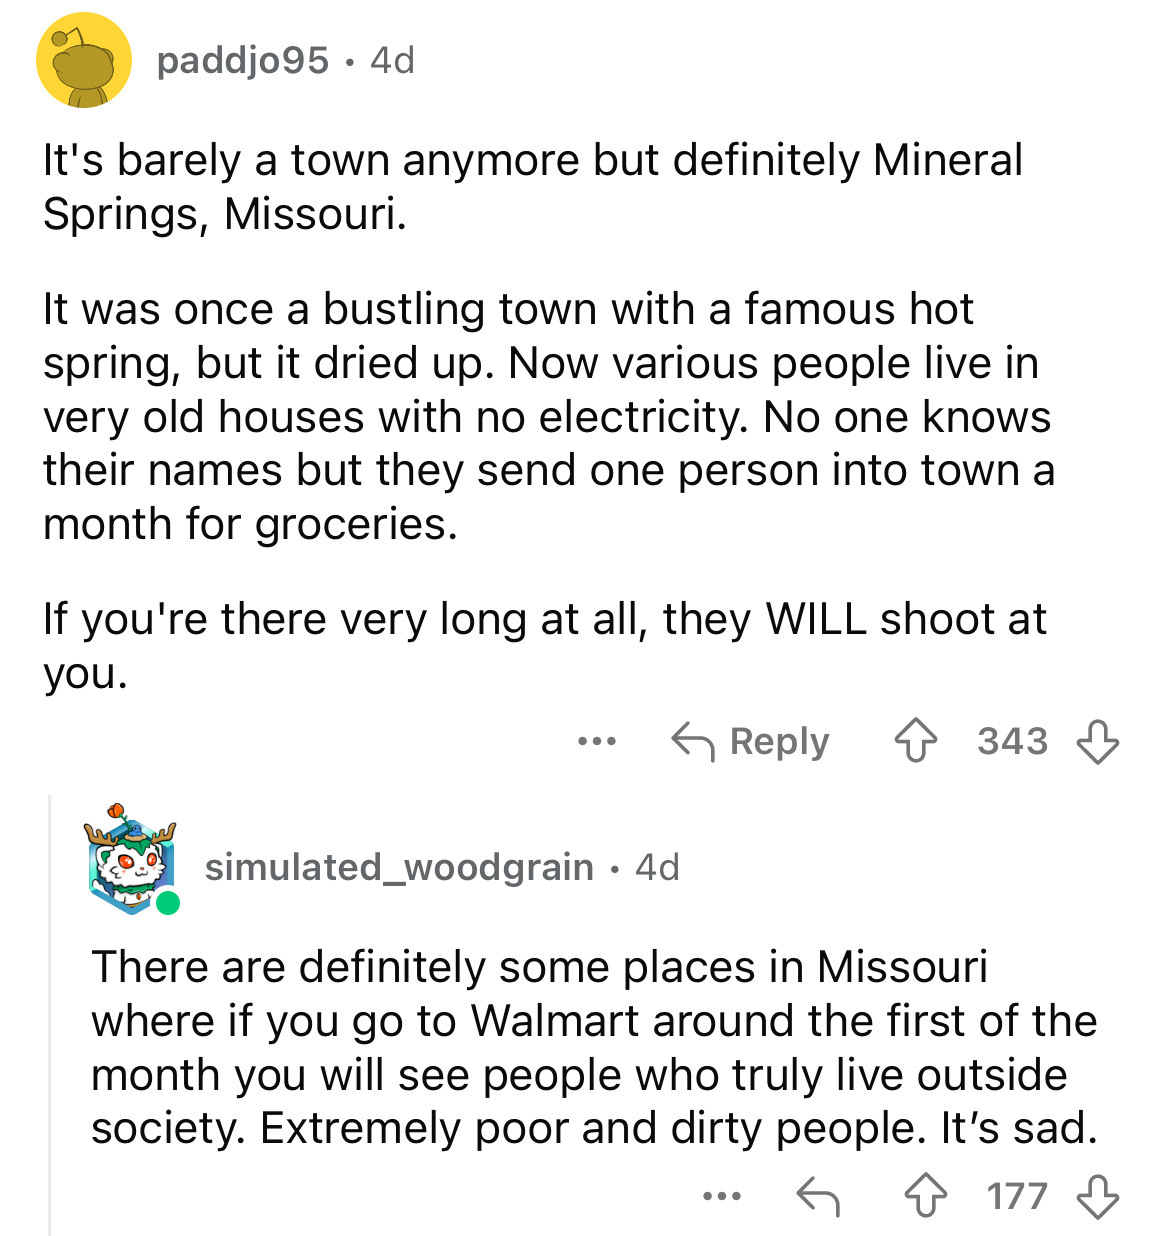 document - paddjo95 4d . It's barely a town anymore but definitely Mineral Springs, Missouri. It was once a bustling town with a famous hot spring, but it dried up. Now various people live in very old houses with no electricity. No one knows their names b